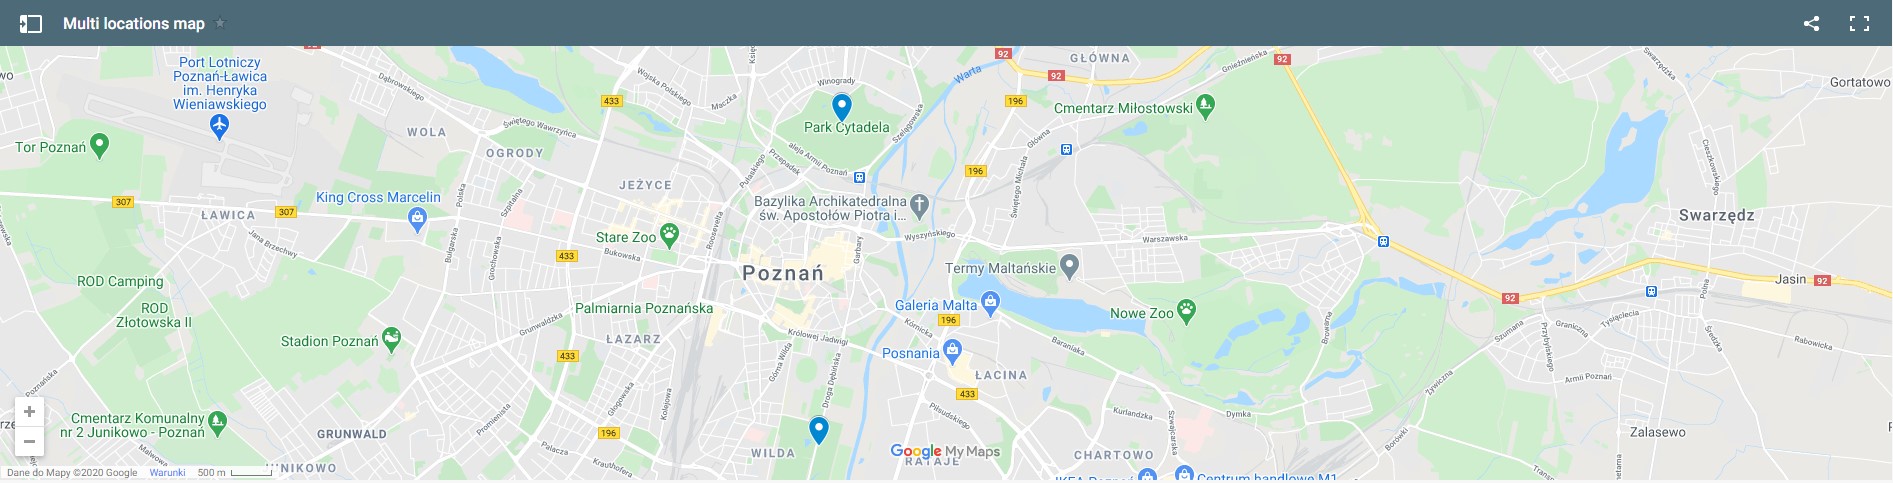 fusion Spokesman Any How to add google maps iframe with multiple locations in Wordpress